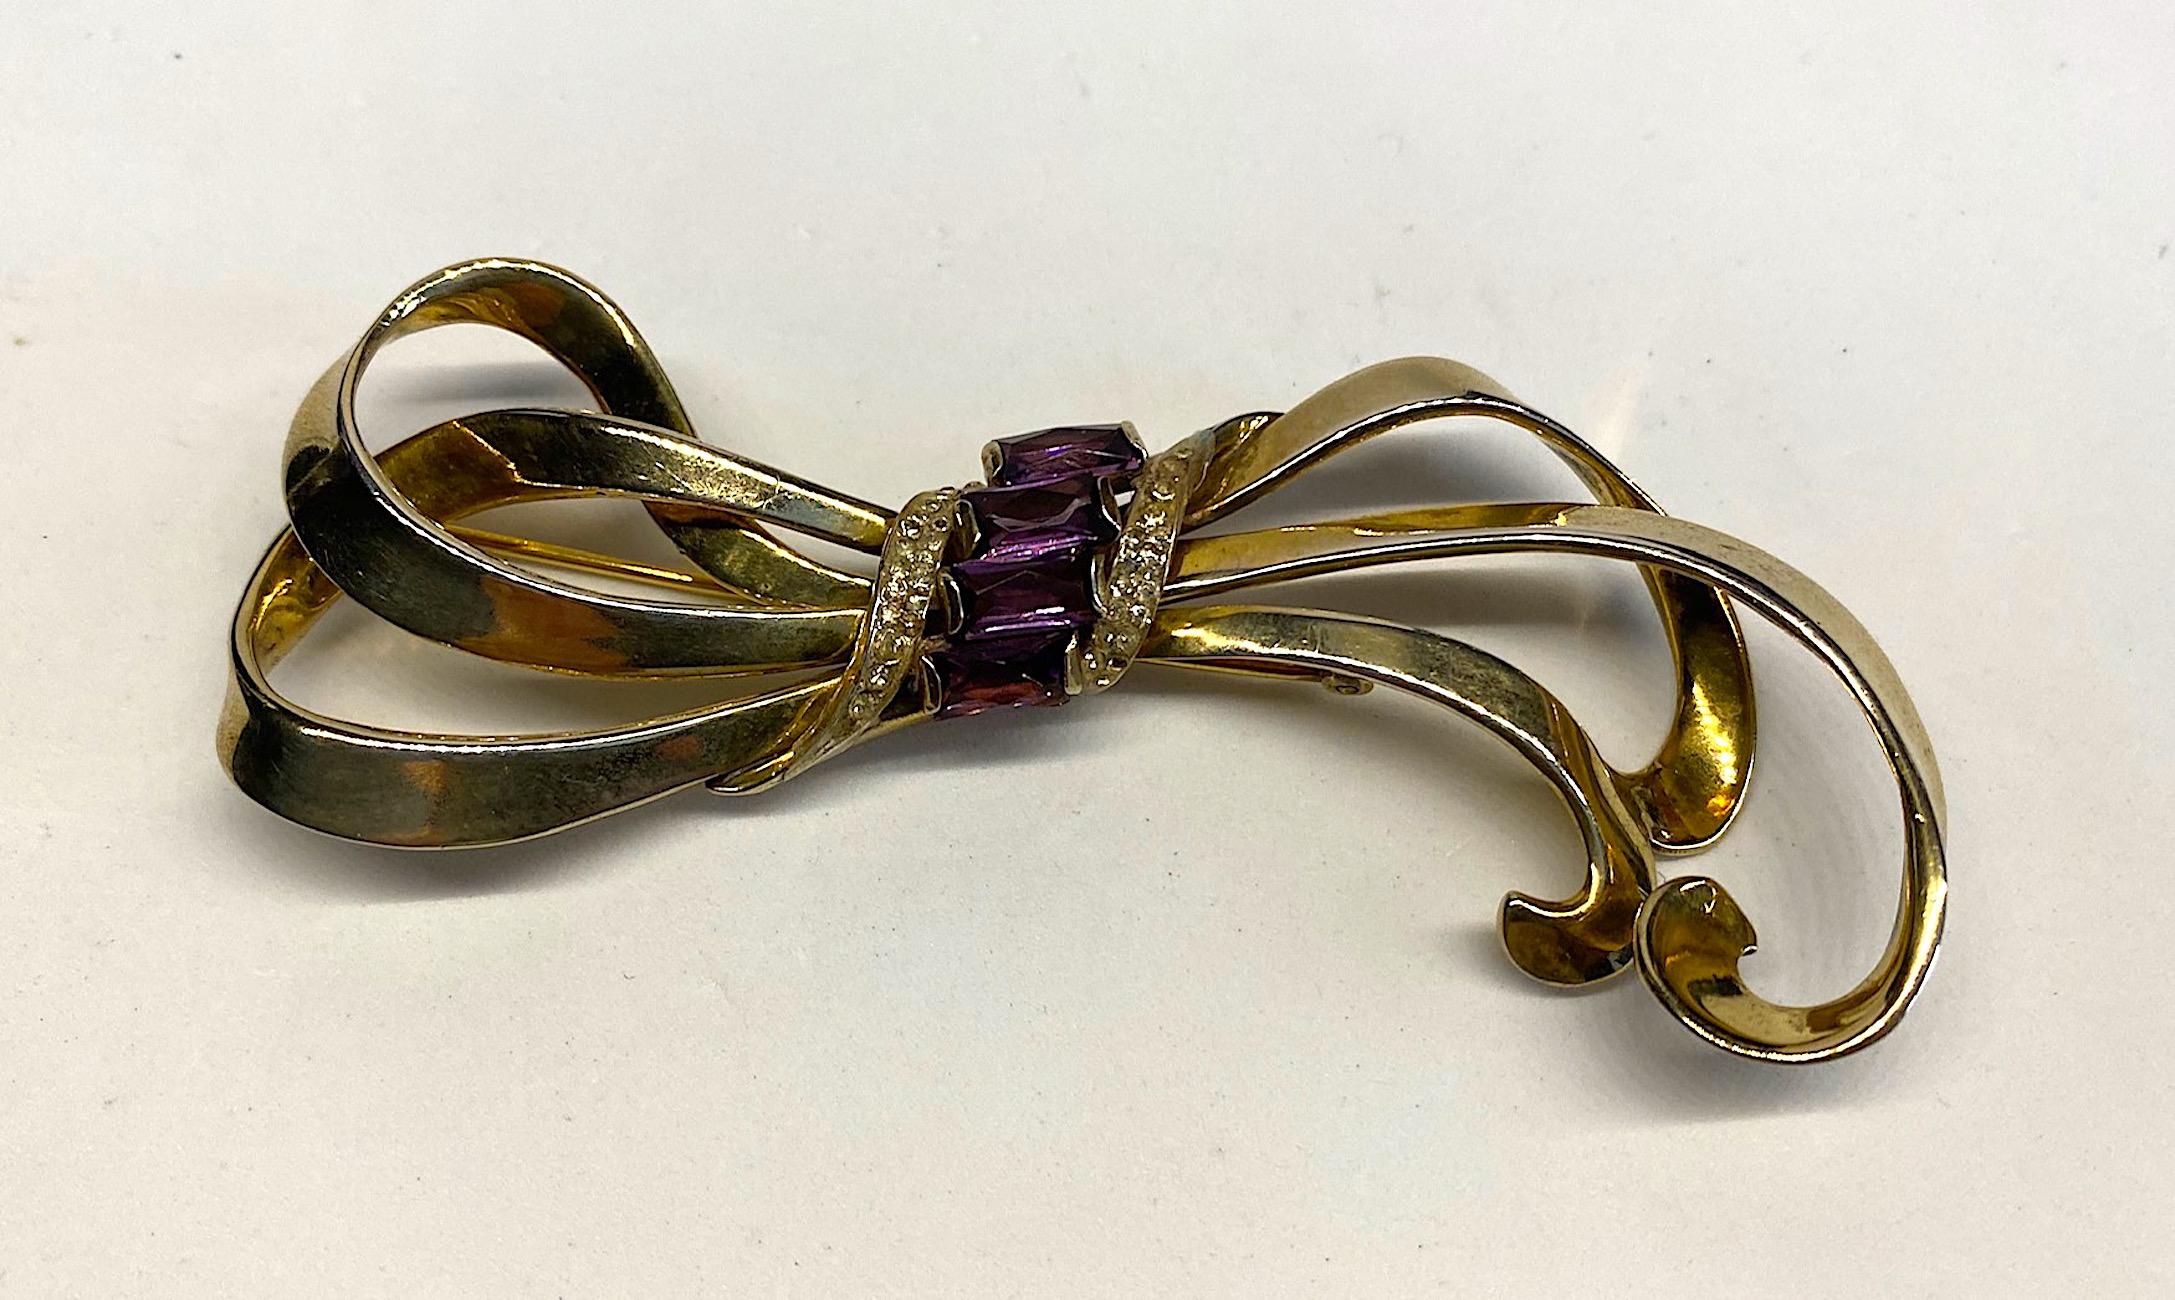 A wonderful sterling silver 1940s large brooch by Nordic Silver Co. Inc. of New York. The brooch is a lovely vintage design of wrapped and looped ribbon in gold on sterling silver vermeil. The center has four vertically set purple faceted crystal